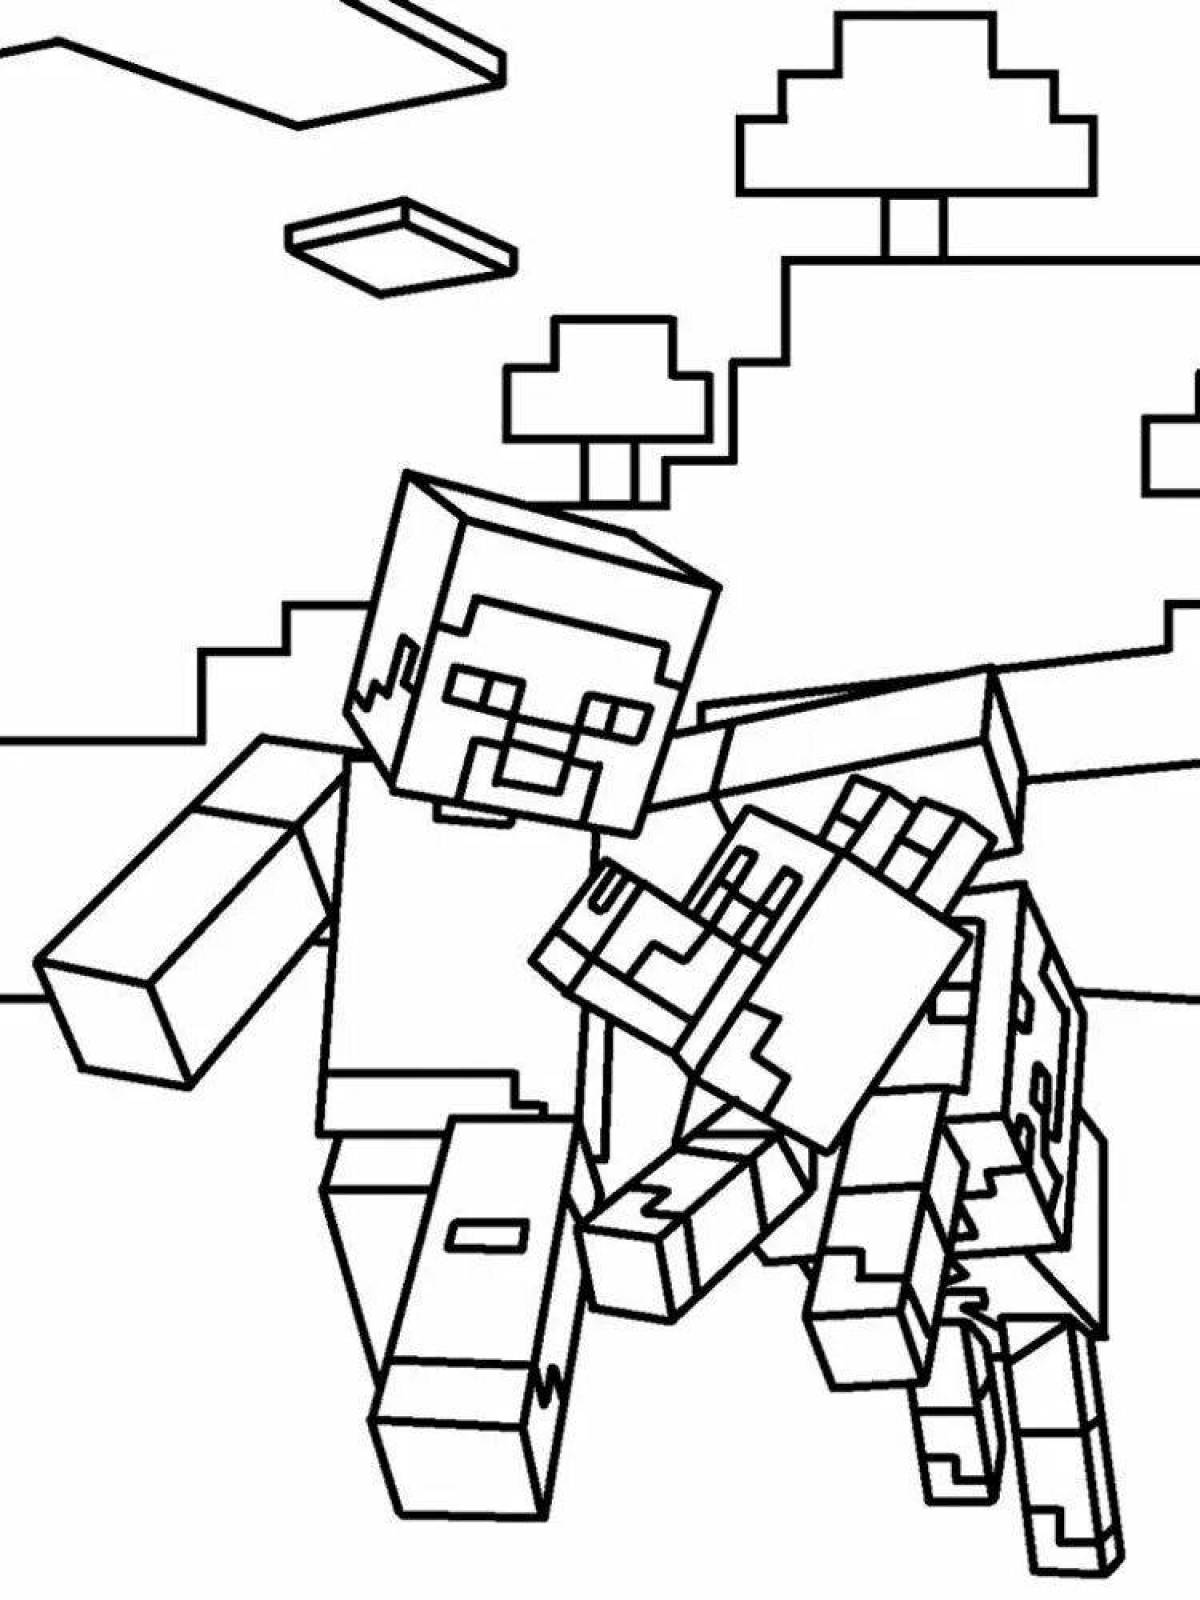 Dazzling minecraft city coloring page